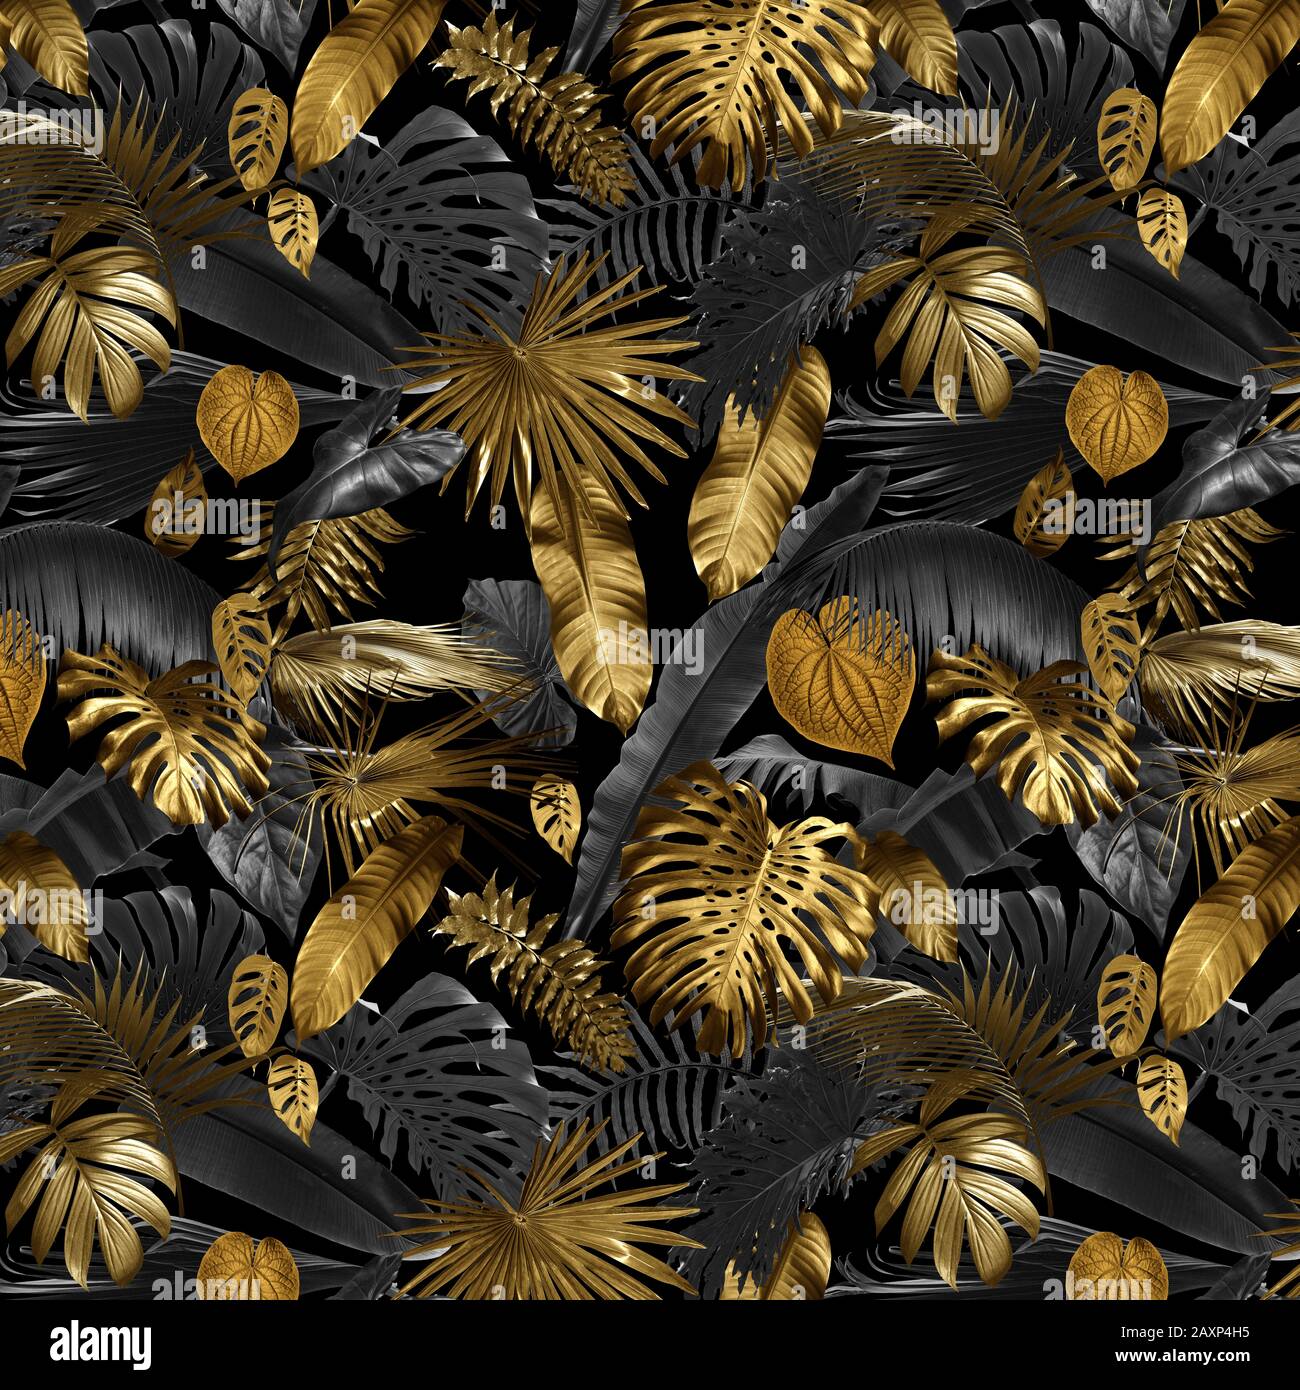 Seamless pattern with tropical leaves in gold color and black, can be